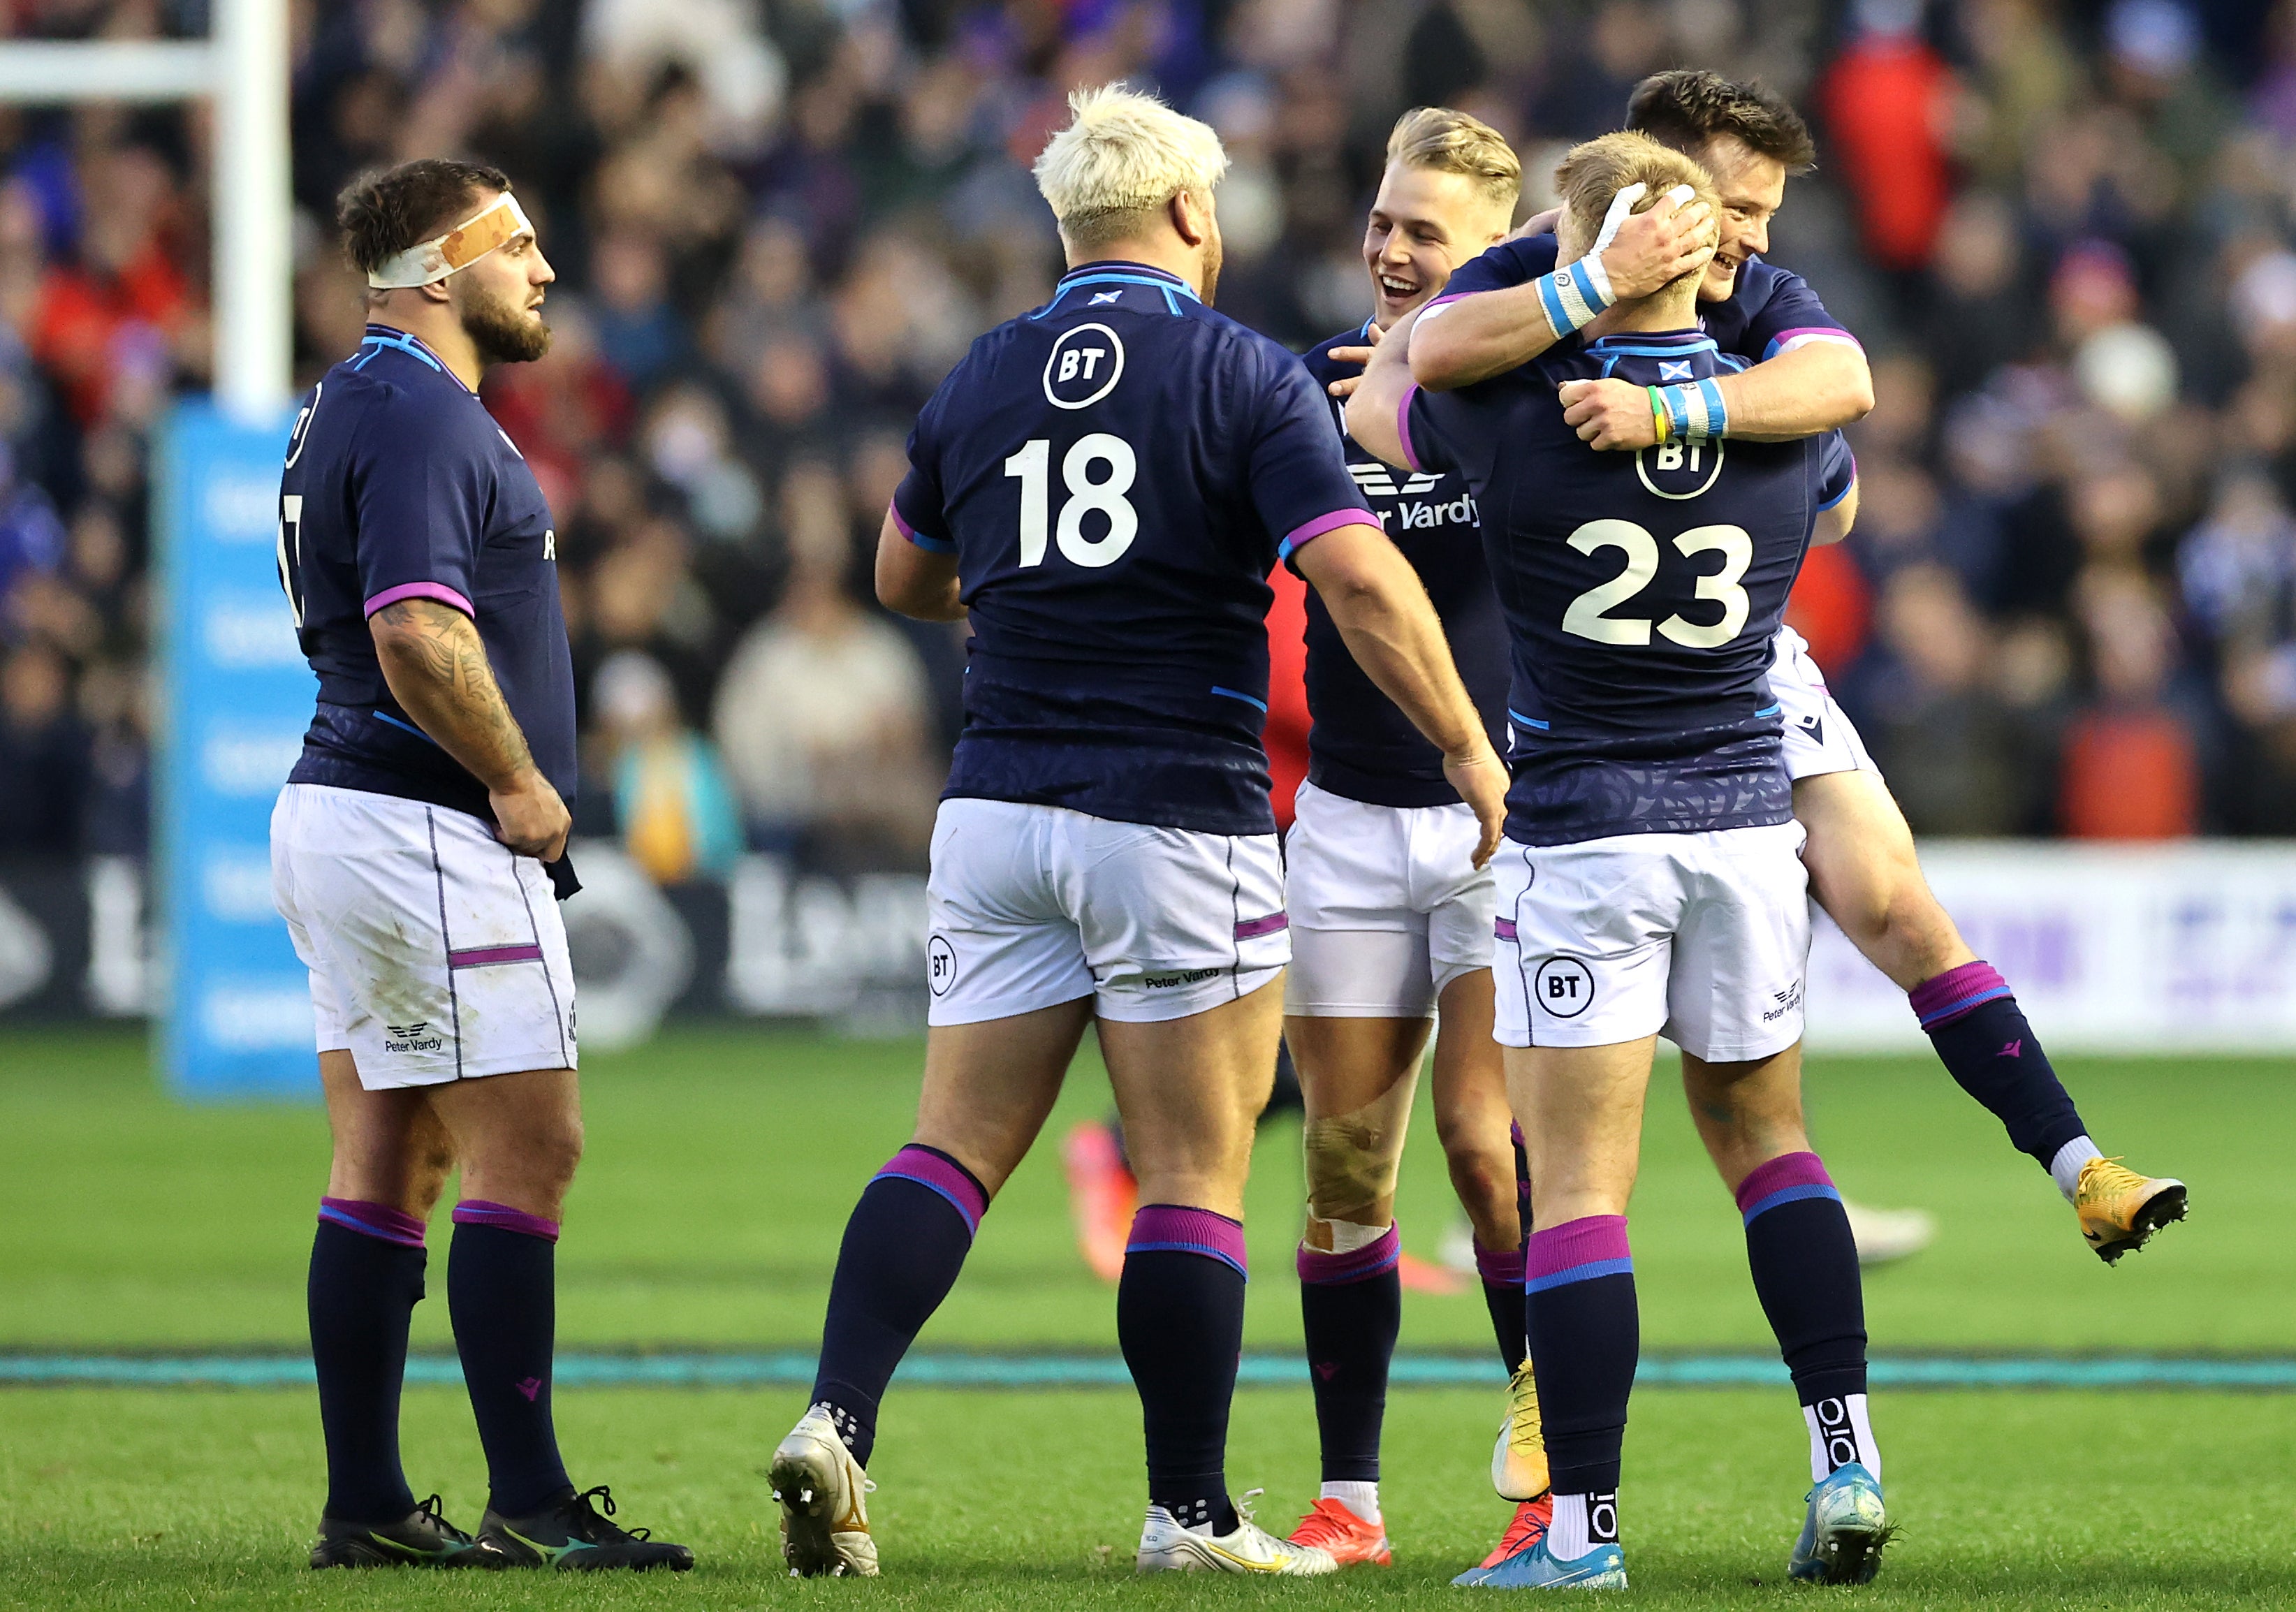 Scotland edged a breathless 15-13 win over Australia at Murrayfield (Steve Walsh/PA)